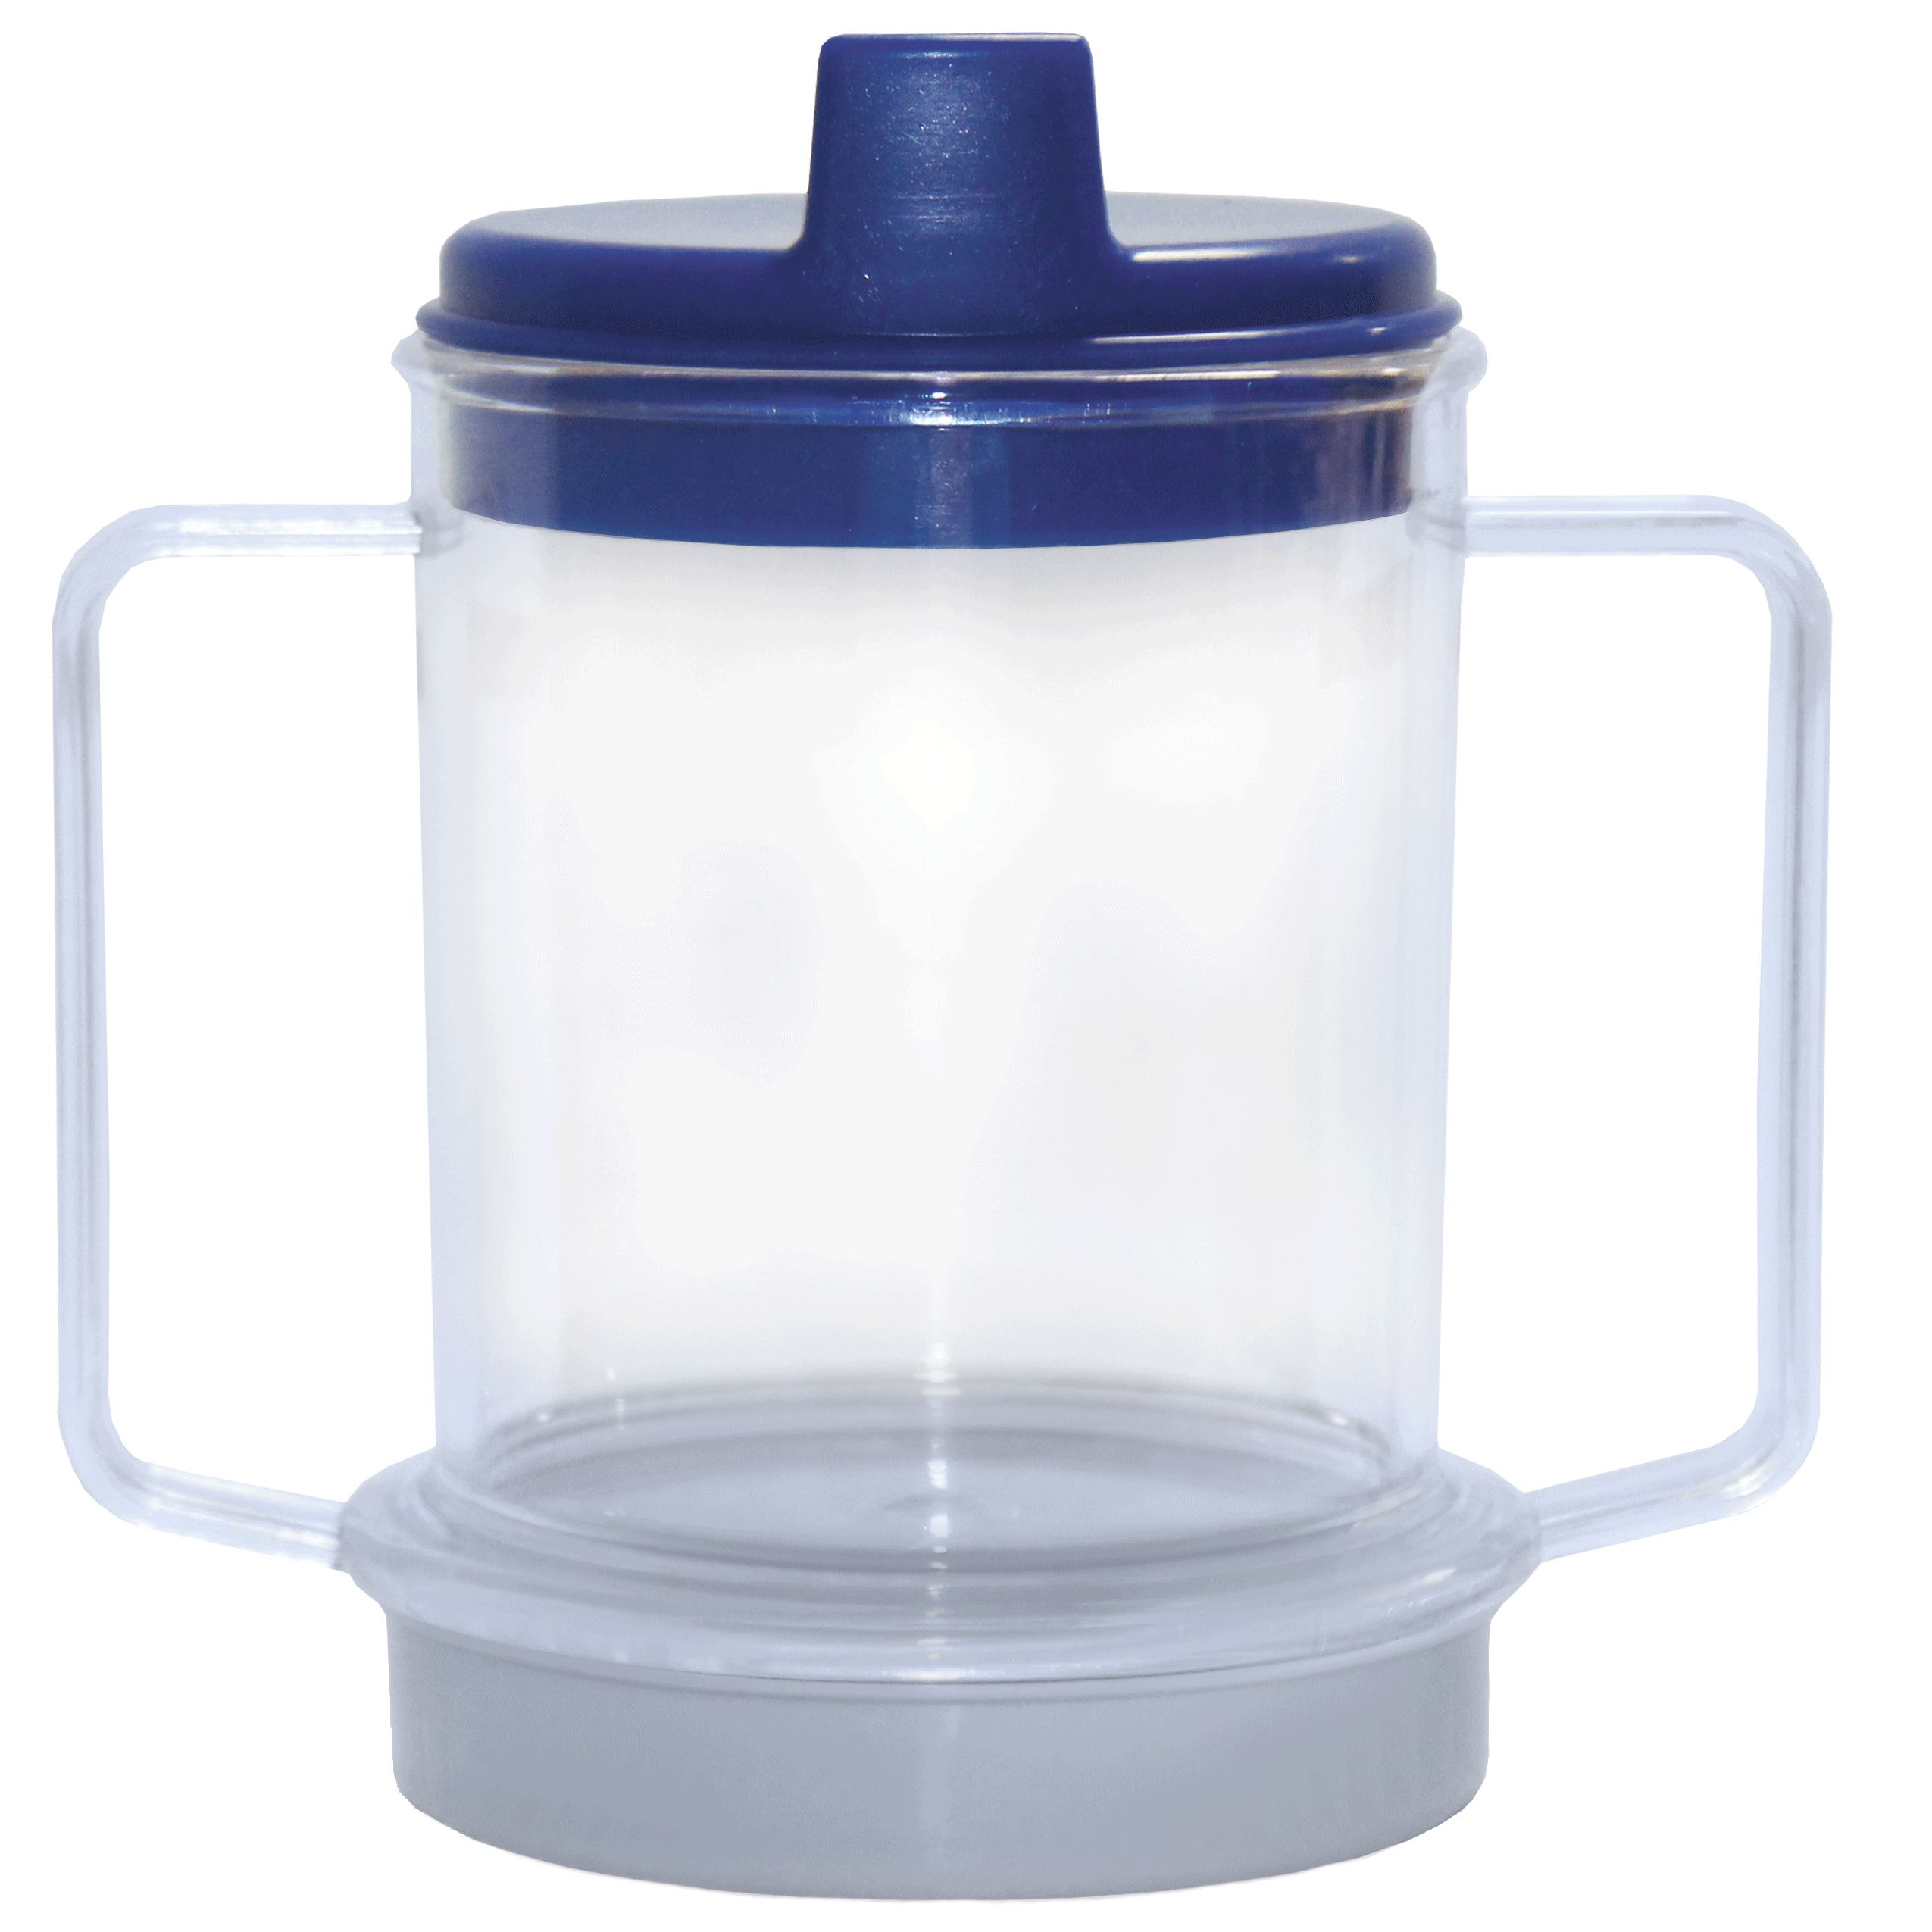 https://i.webareacontrol.com/fullimage/1000-X-1000/2/s/27520195757clear-cup-with-handles-P.png